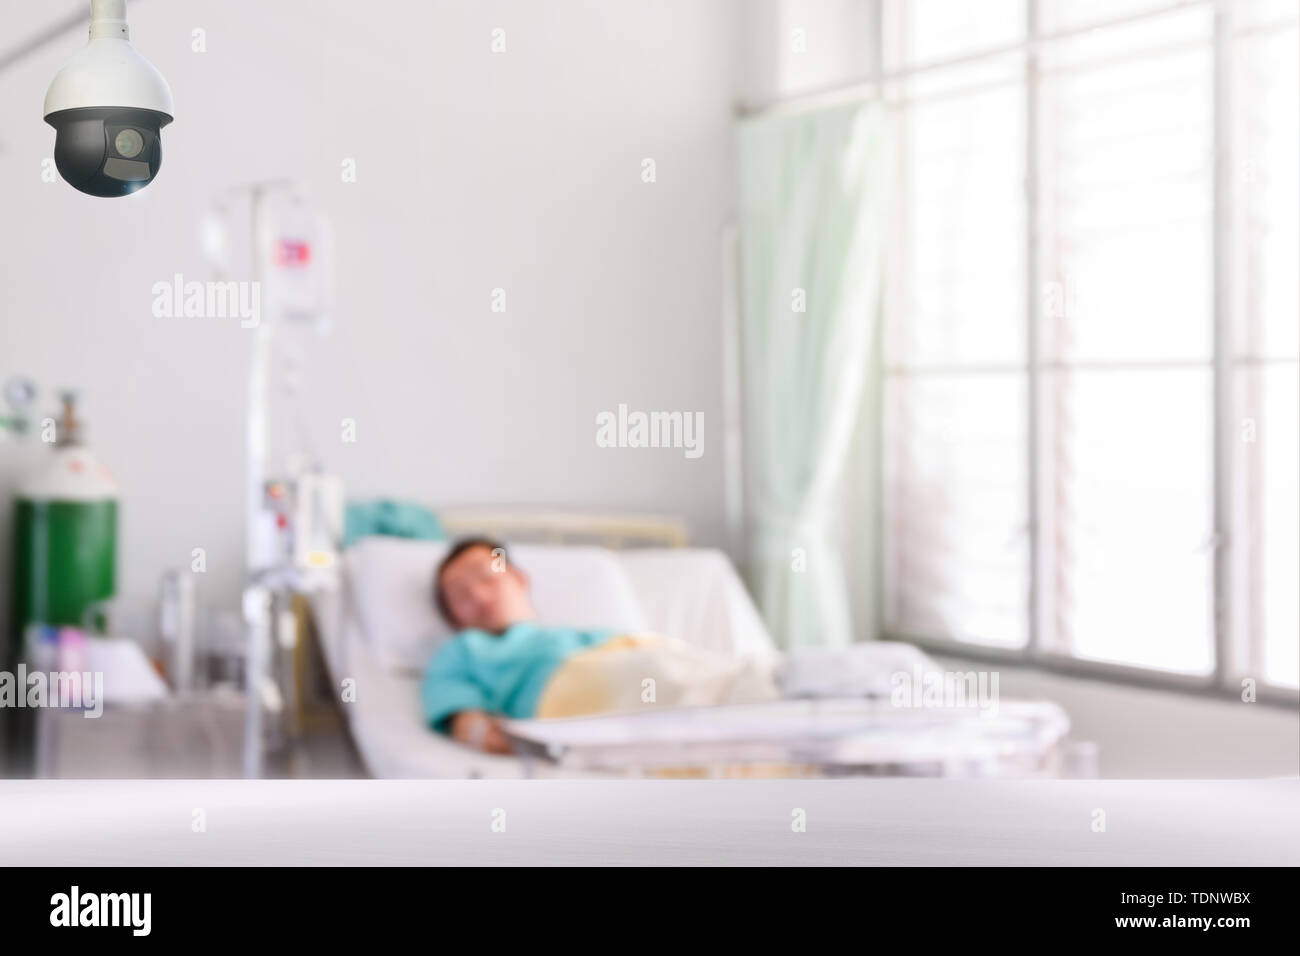 cctv camera with blurred patient in isolation room for monitor patient safety nurse or doctor for infection control Stock Photo